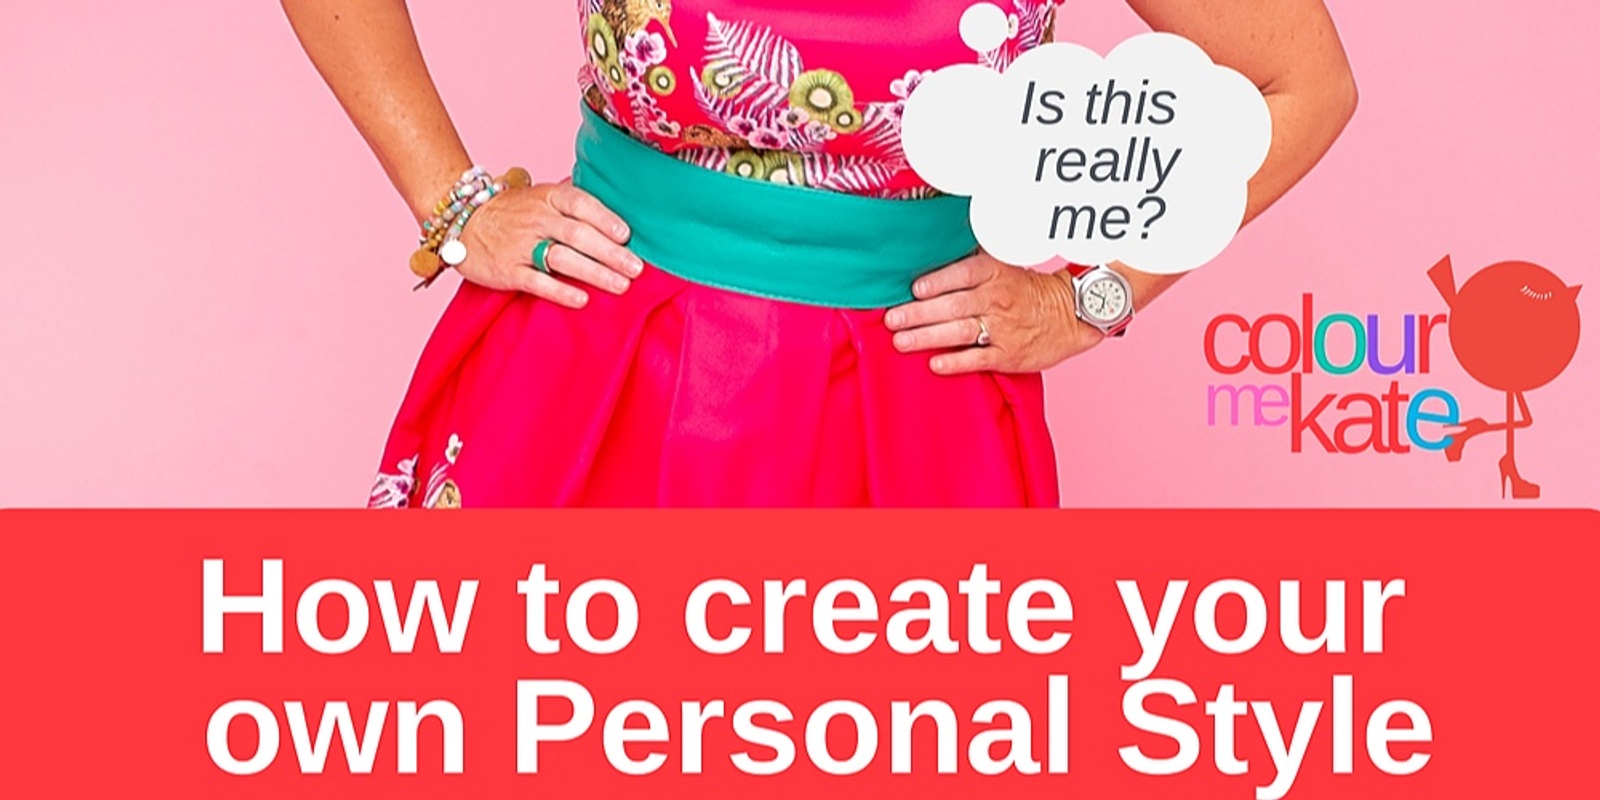 How to create your own Personal Style